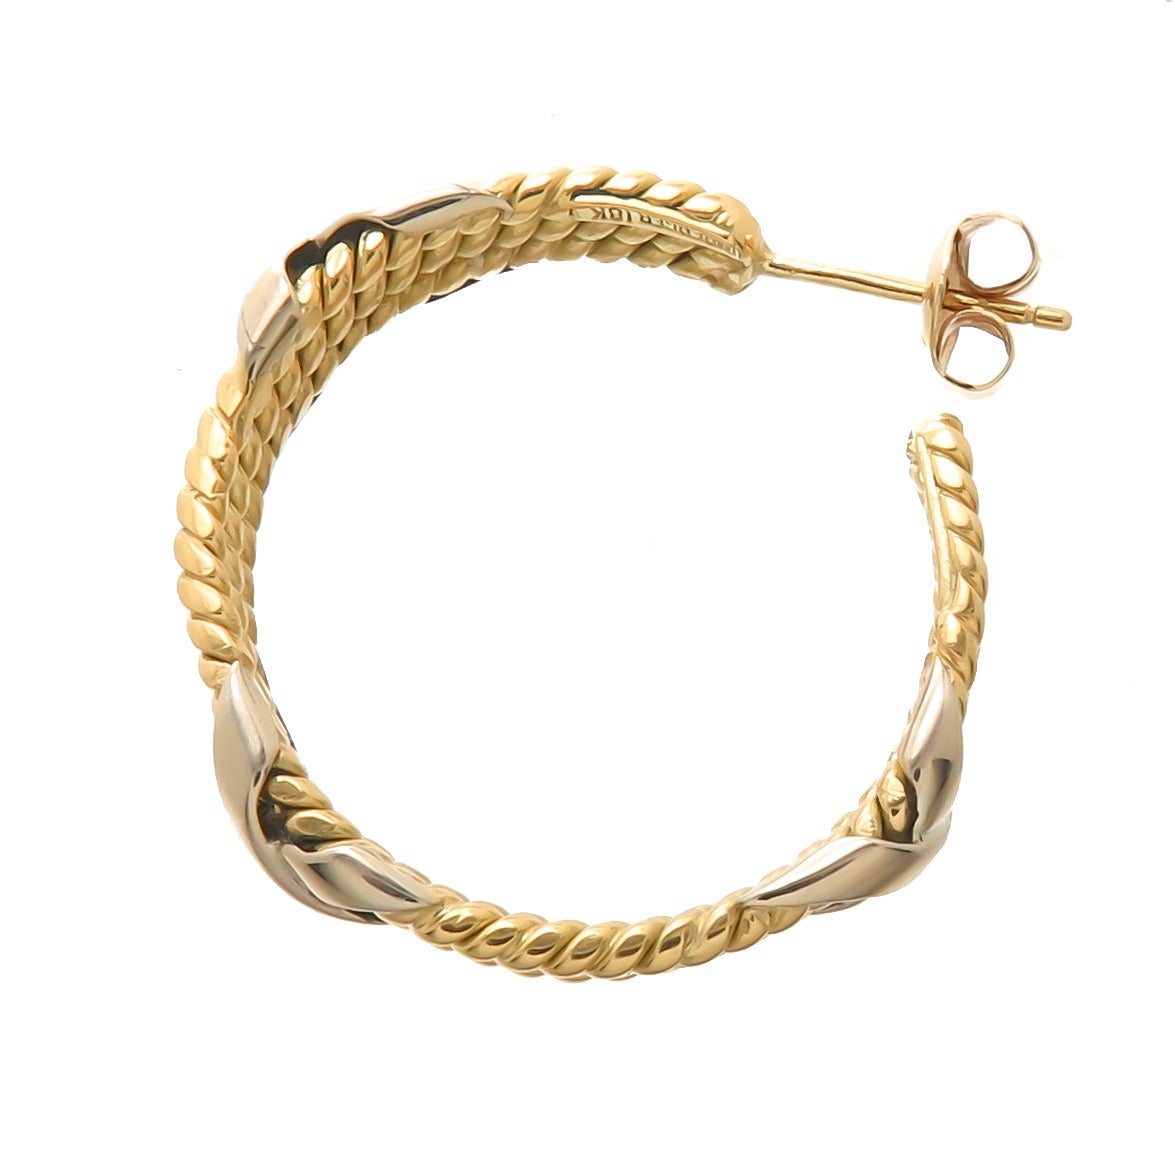 Circa 1990 Jean Schlumberger for Tiffany & Company 18k Yellow Gold 3 Row Rope and X Hoop Earrings. Measuring 3/16 inch wide and 1 inch in Diameter.